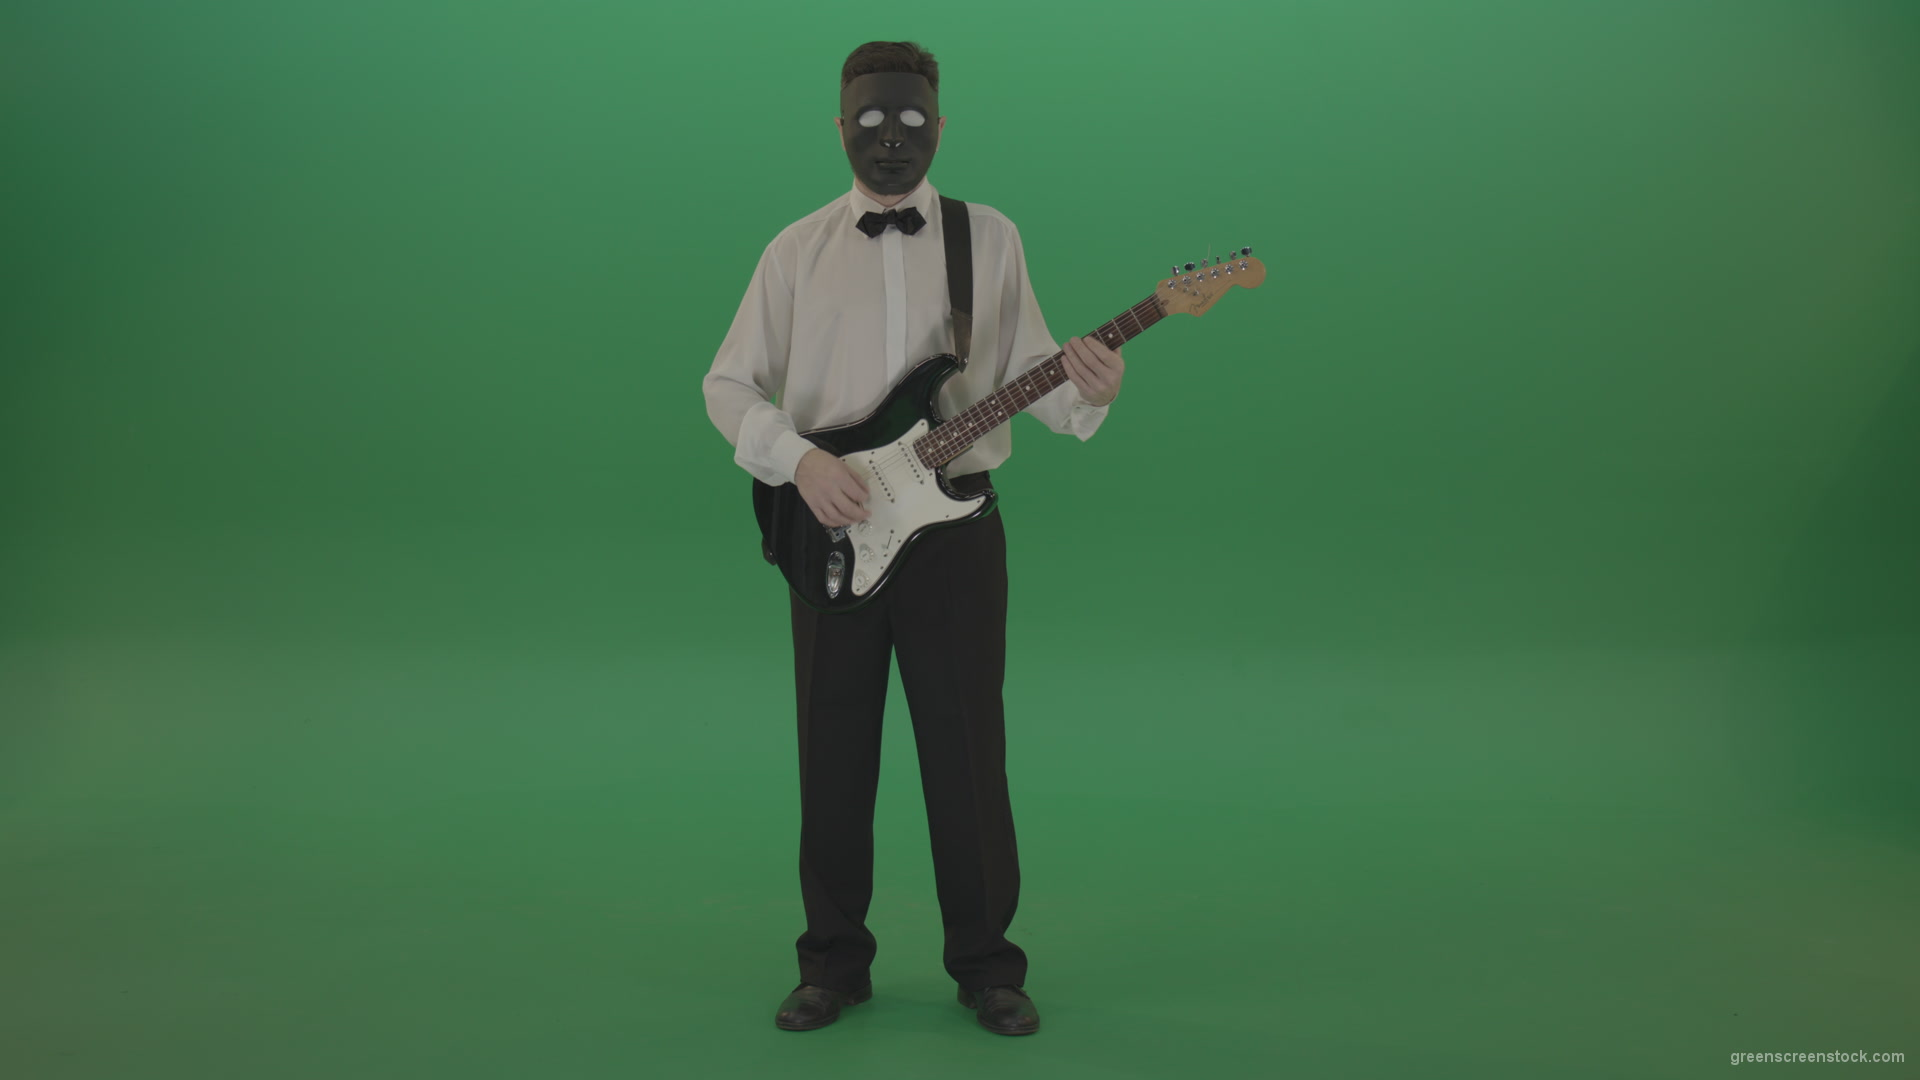 Classic-guitarist-in-white-shirt-play-guitar-in-mask-isolated-on-green-screen_006 Green Screen Stock